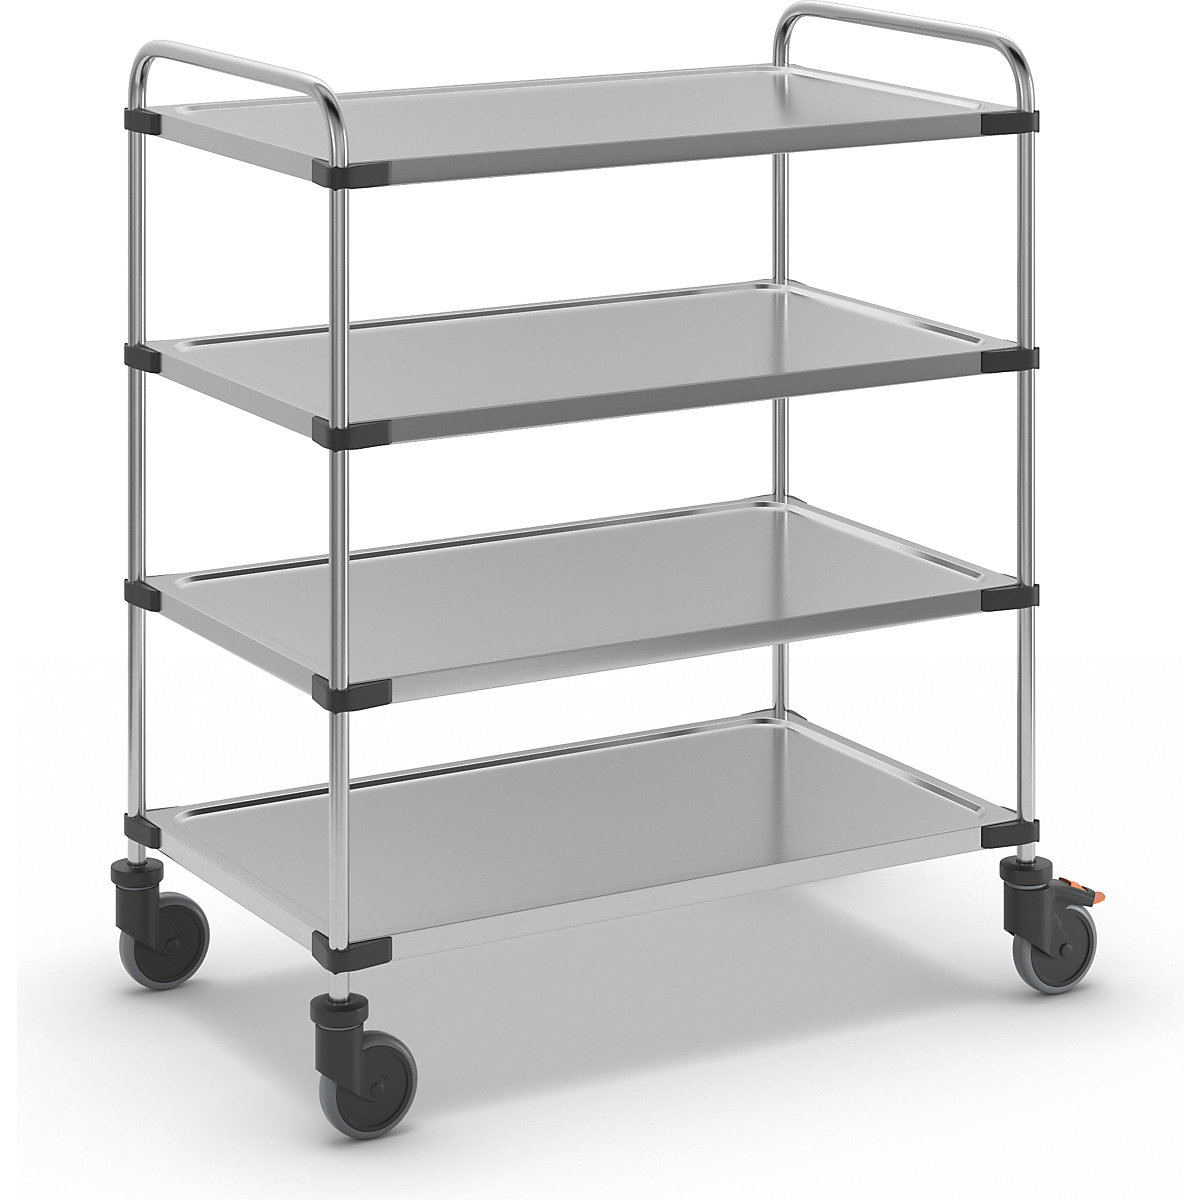 Stainless steel table trolley